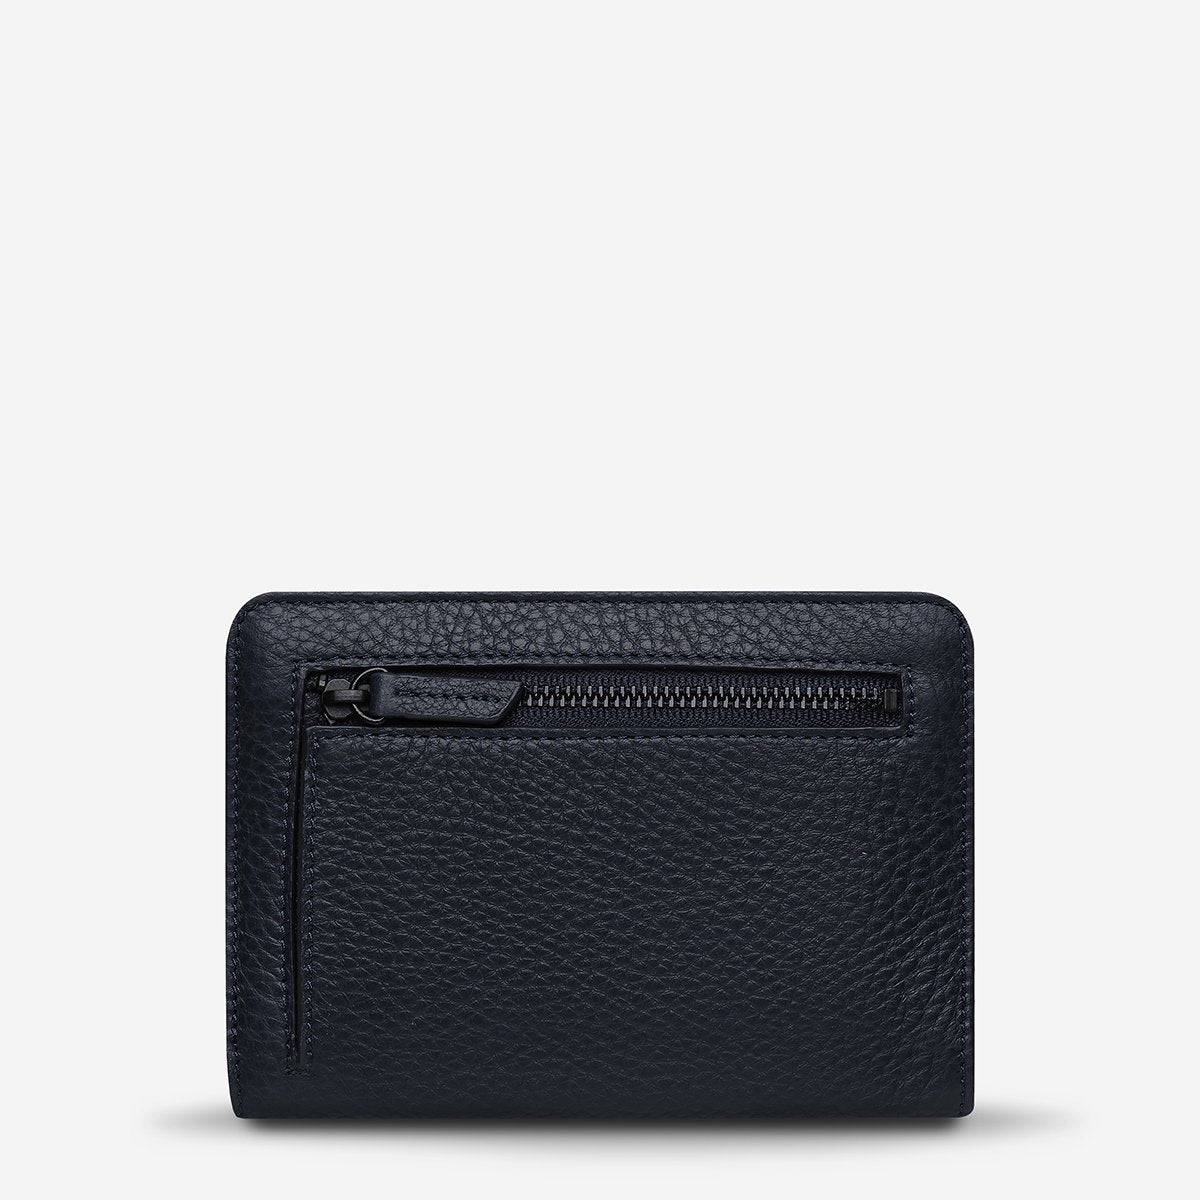 Popular Problems Leather Wallet - Navy Blue